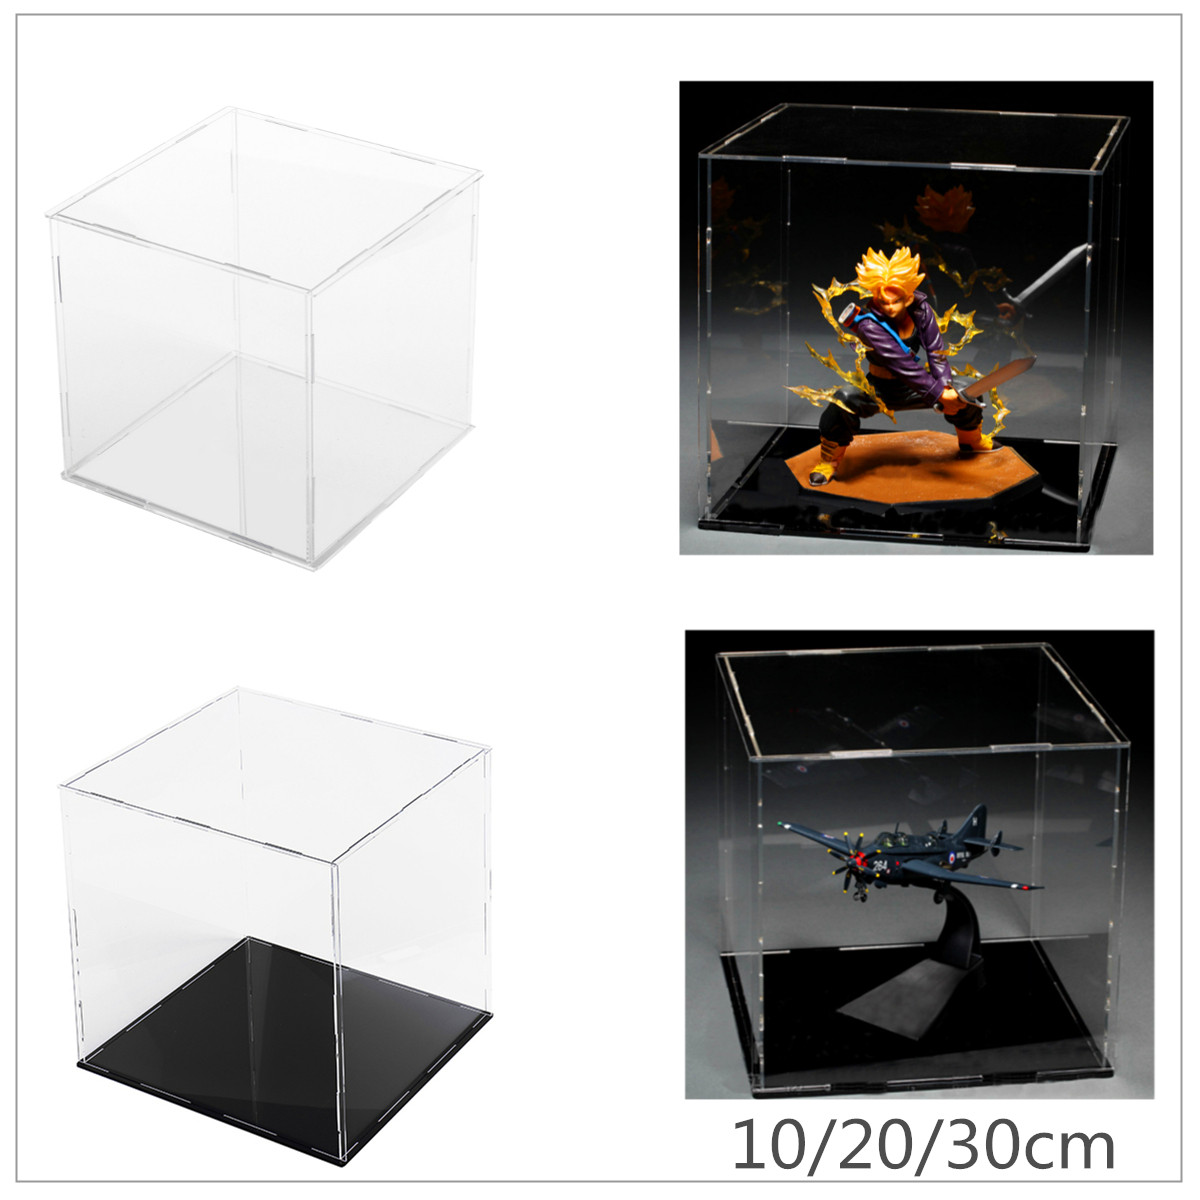 102030cm-Acrylic-Display-Case-Box-Dustproof-Self-Assembly-Model-Protection-1640462-1